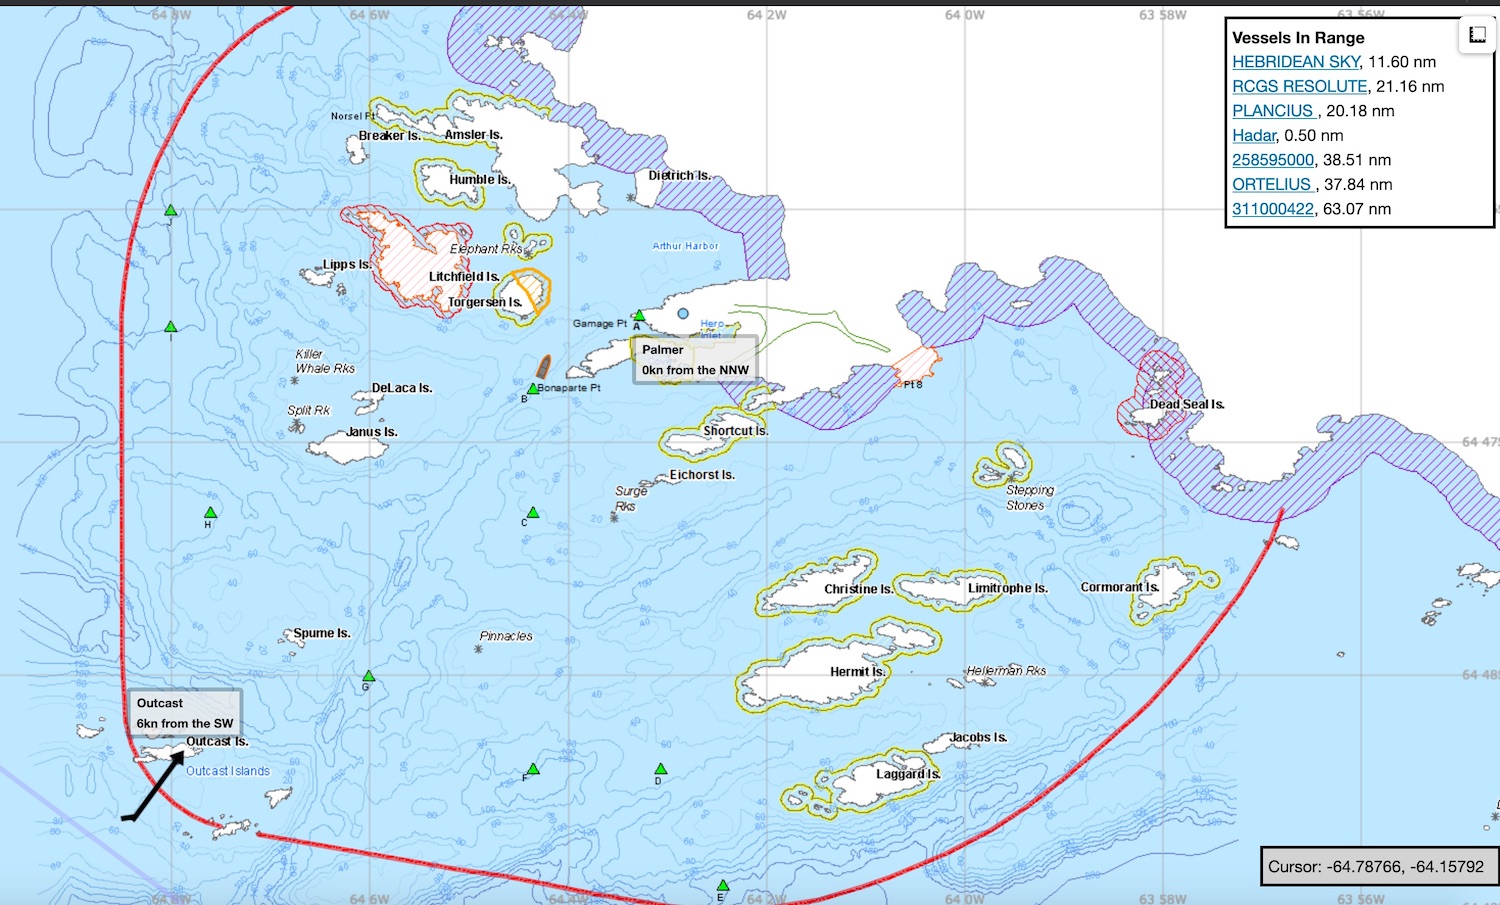 Vessel map with AIS